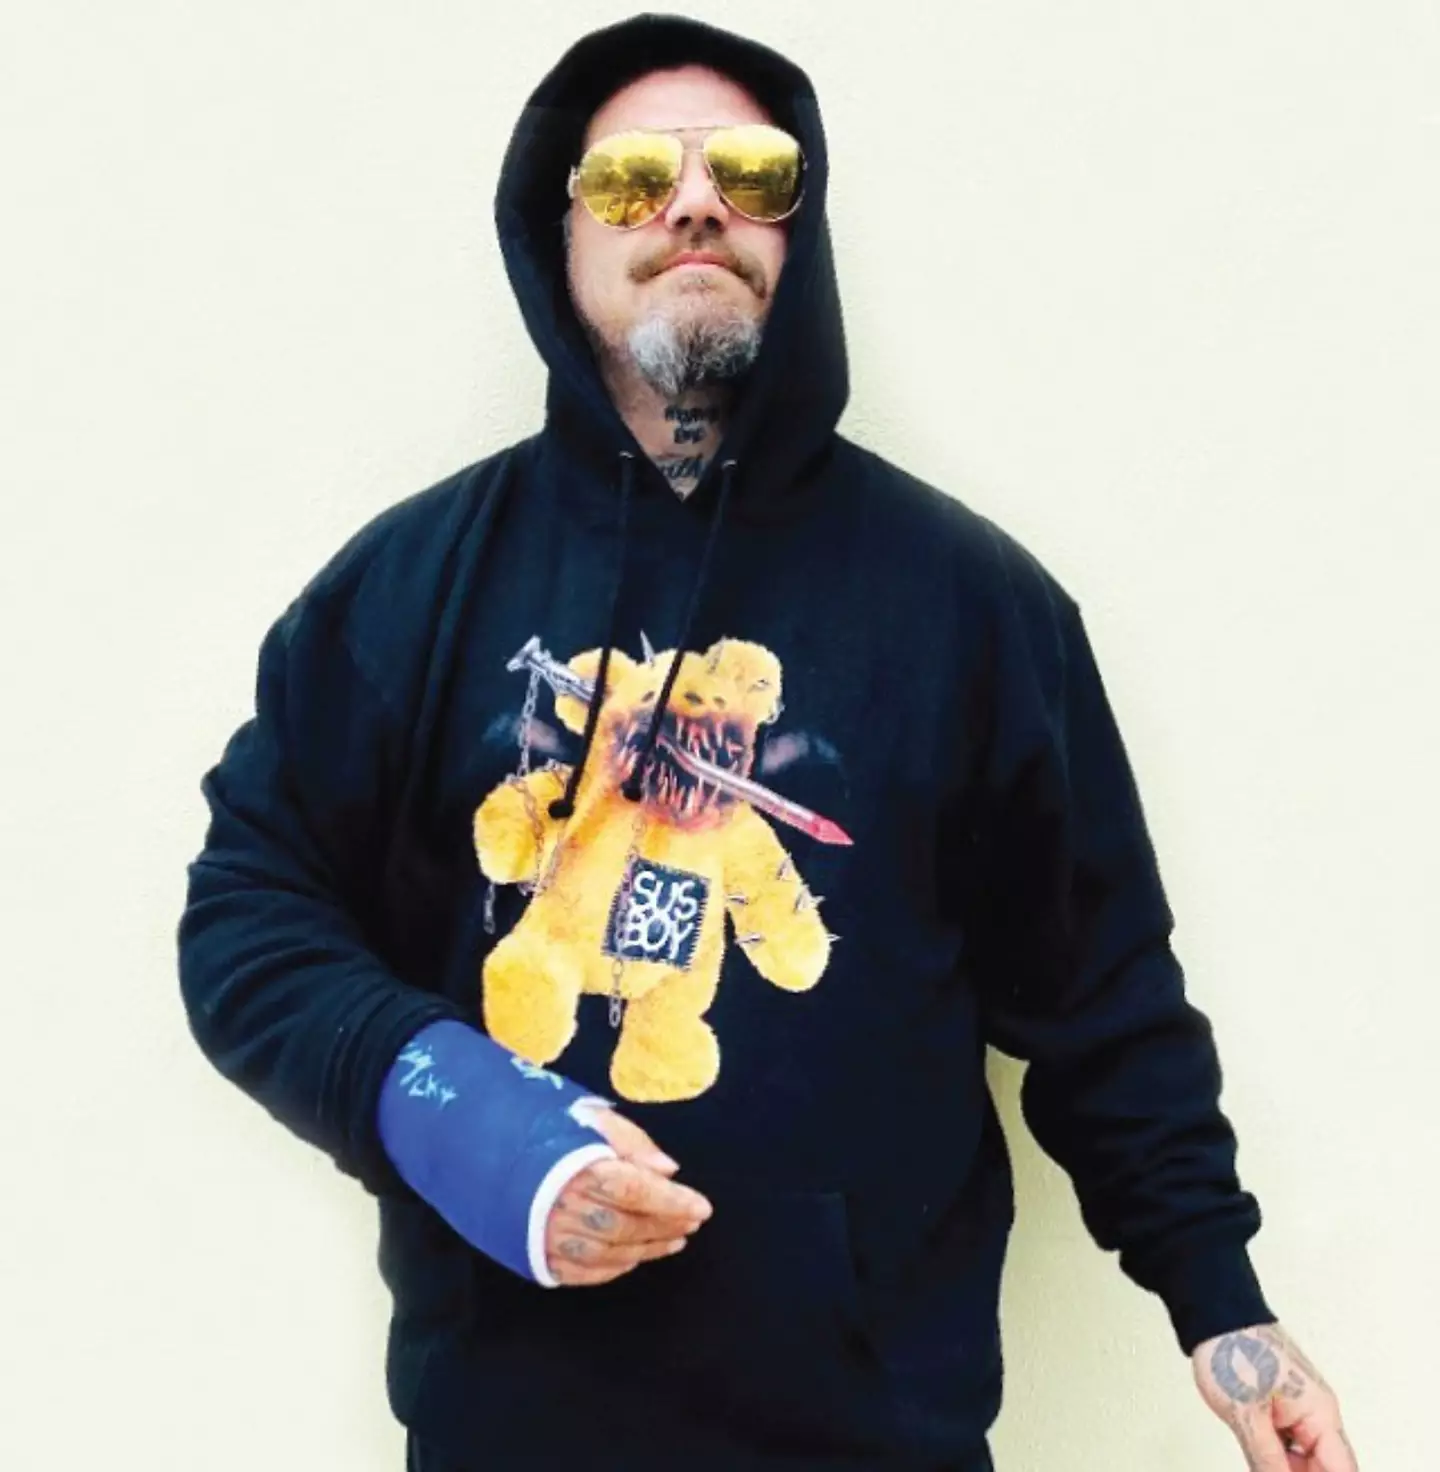 Bam Margera has requested his court date to be moved forward so that he can see his son.